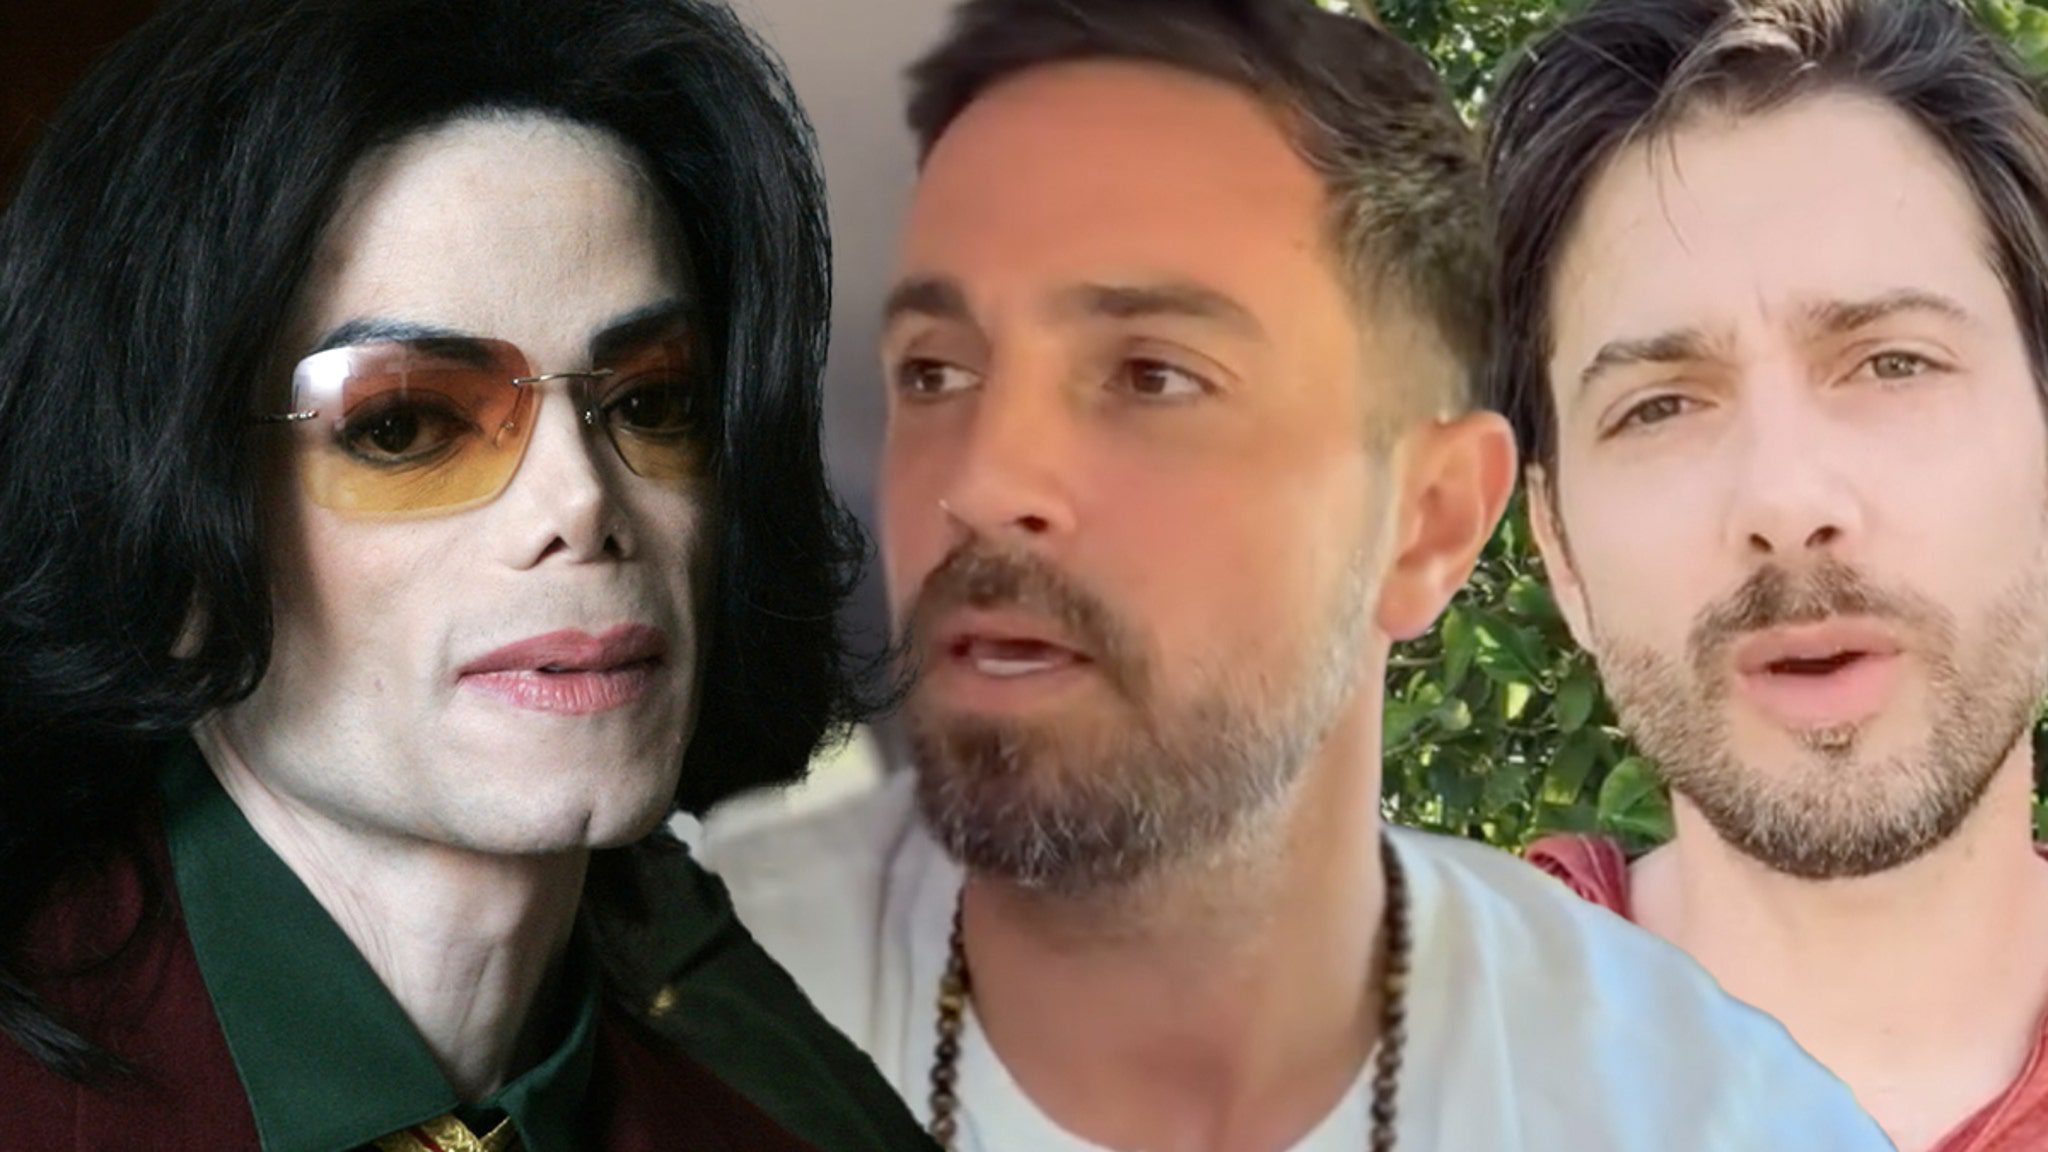 Michael Jackson’s Co. Wants to Block Accusers from Getting Genitalia Pics